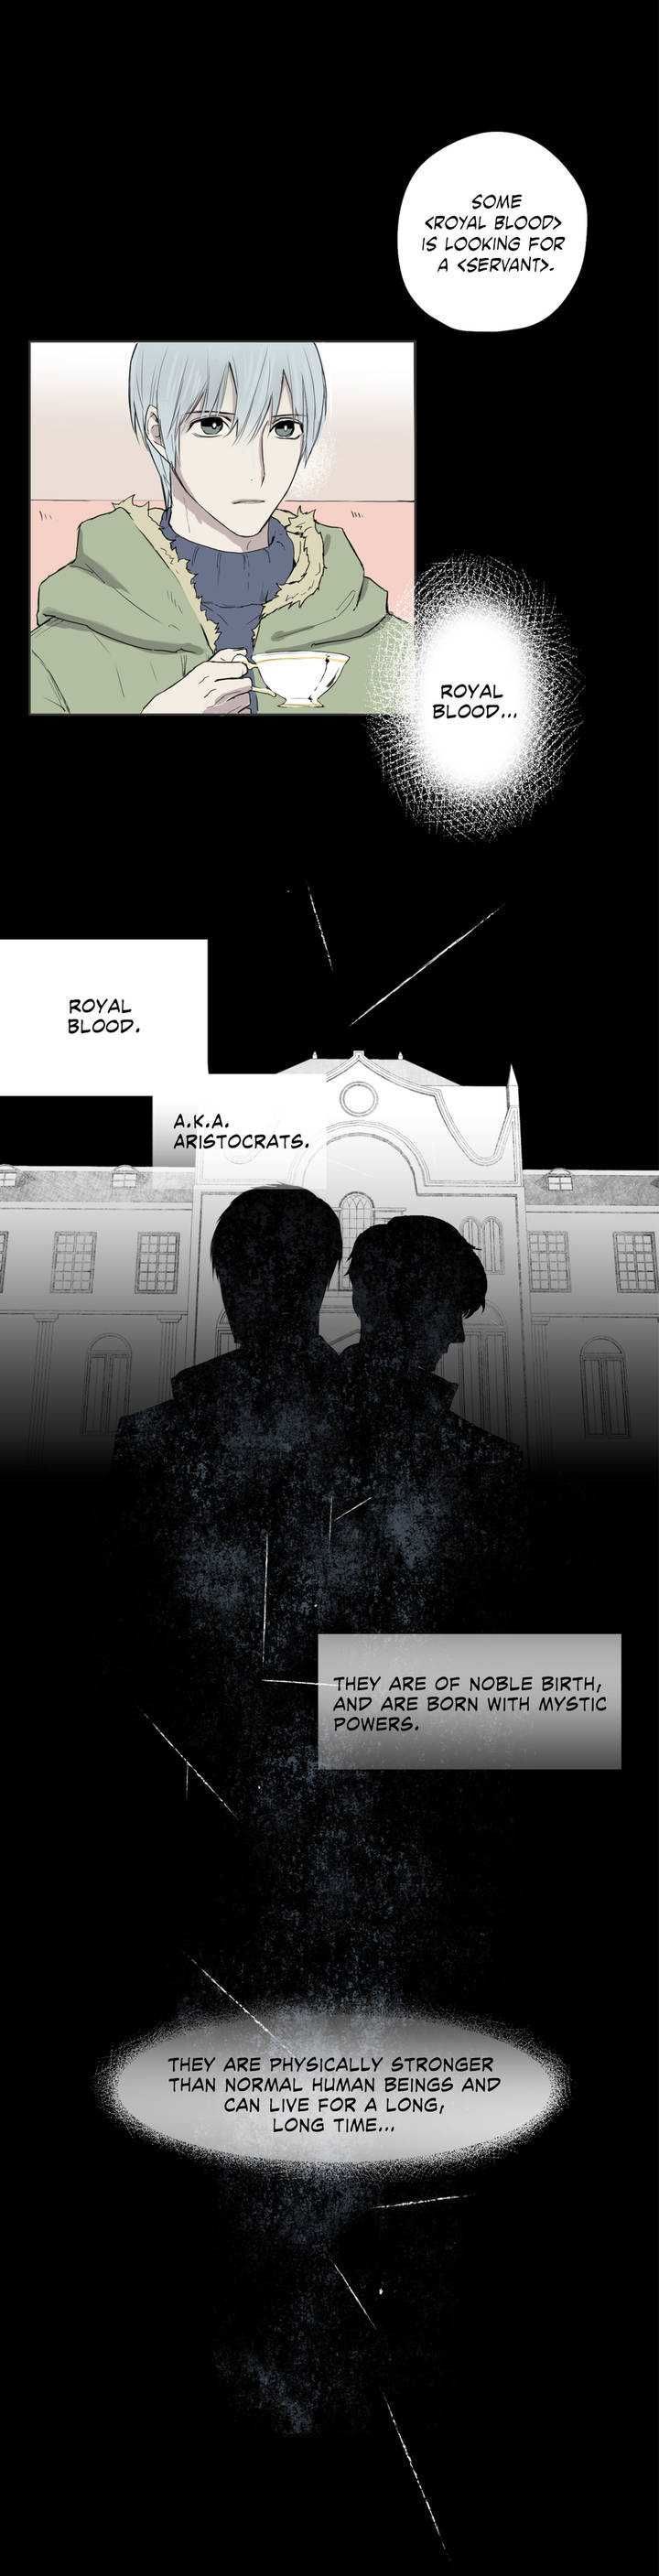 Royal Servant - Chapter 1 Page 5